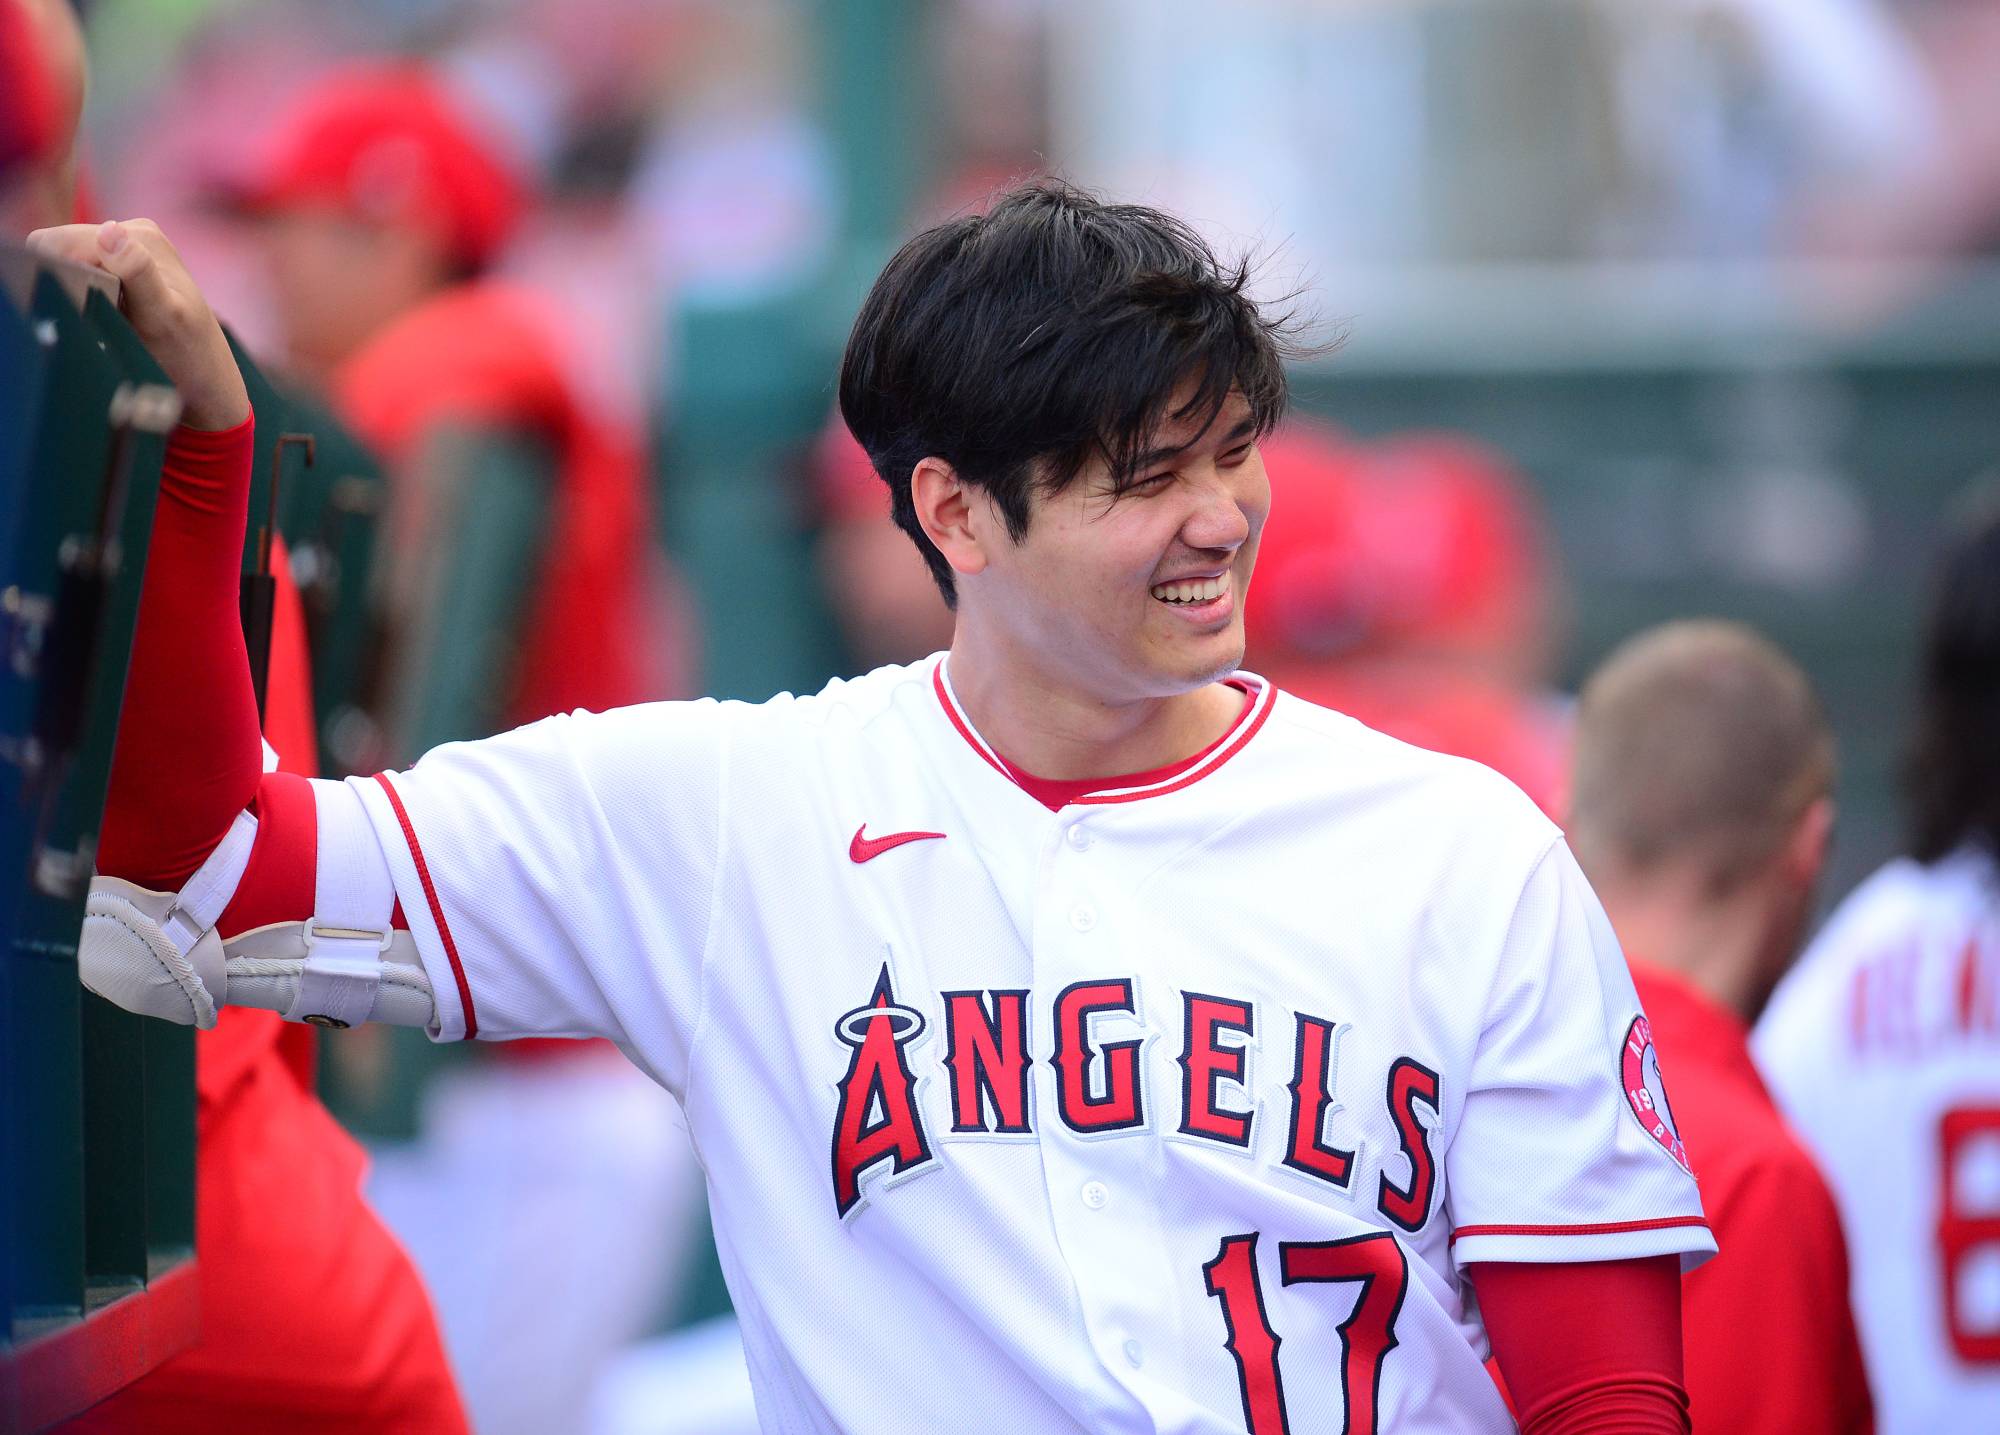 Ohtani becomes first Japanese player to have top-selling MLB jersey